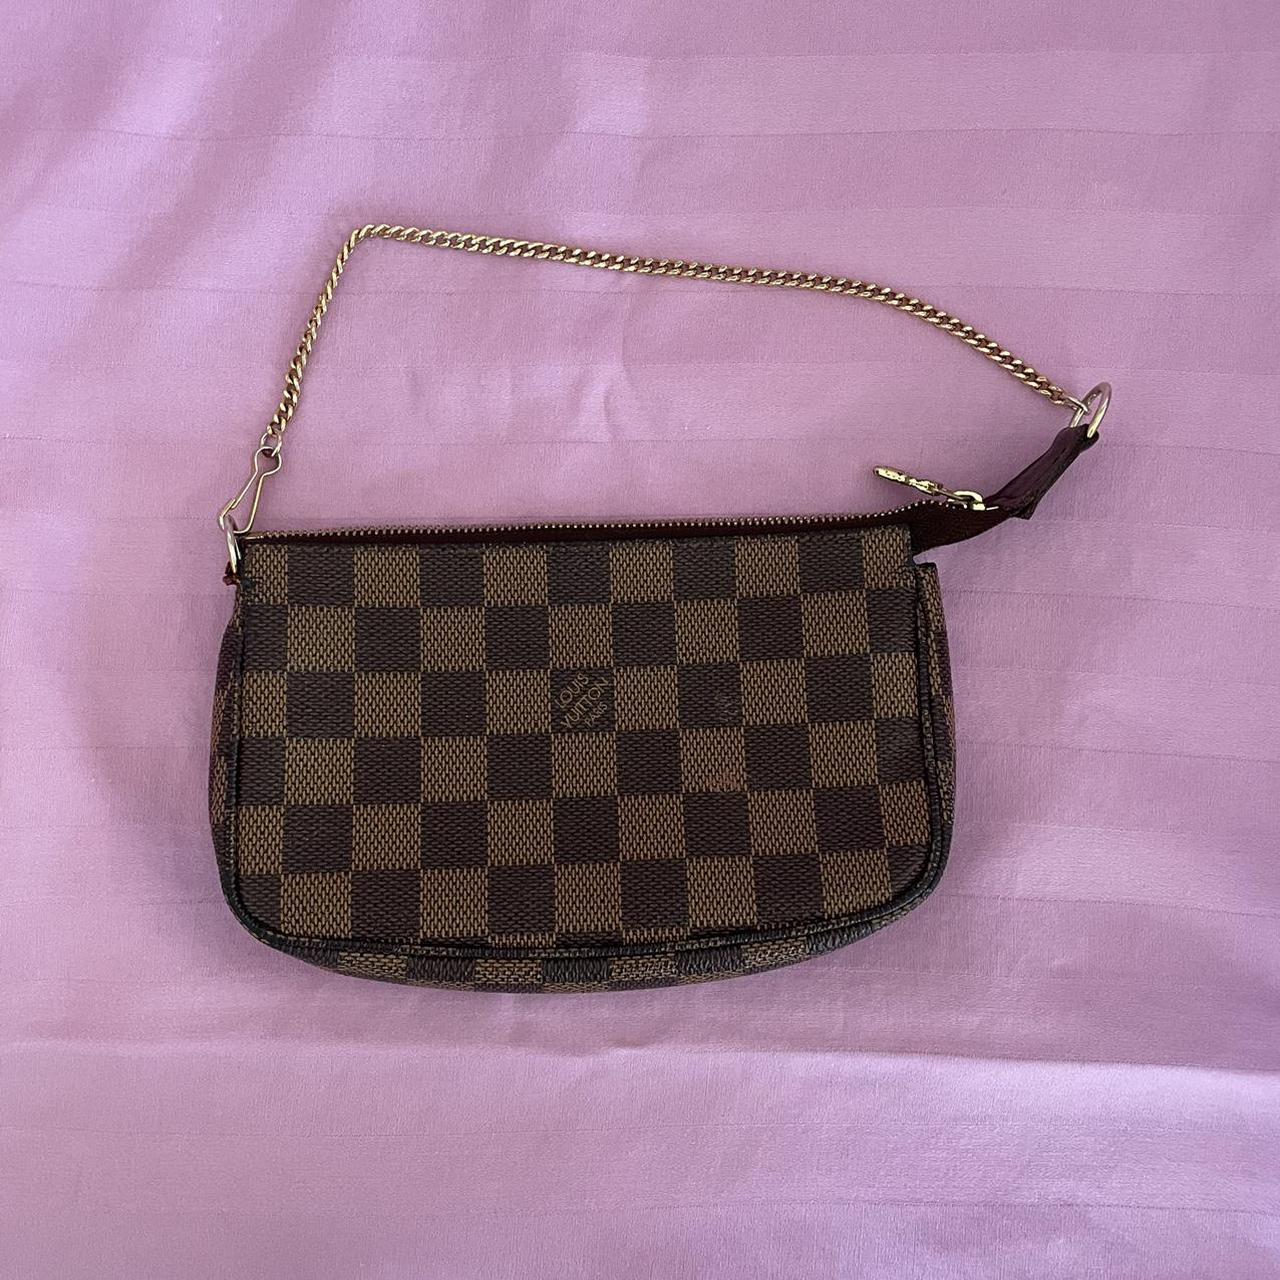 Limited Edition Louis Vuitton perforated Musette - Depop